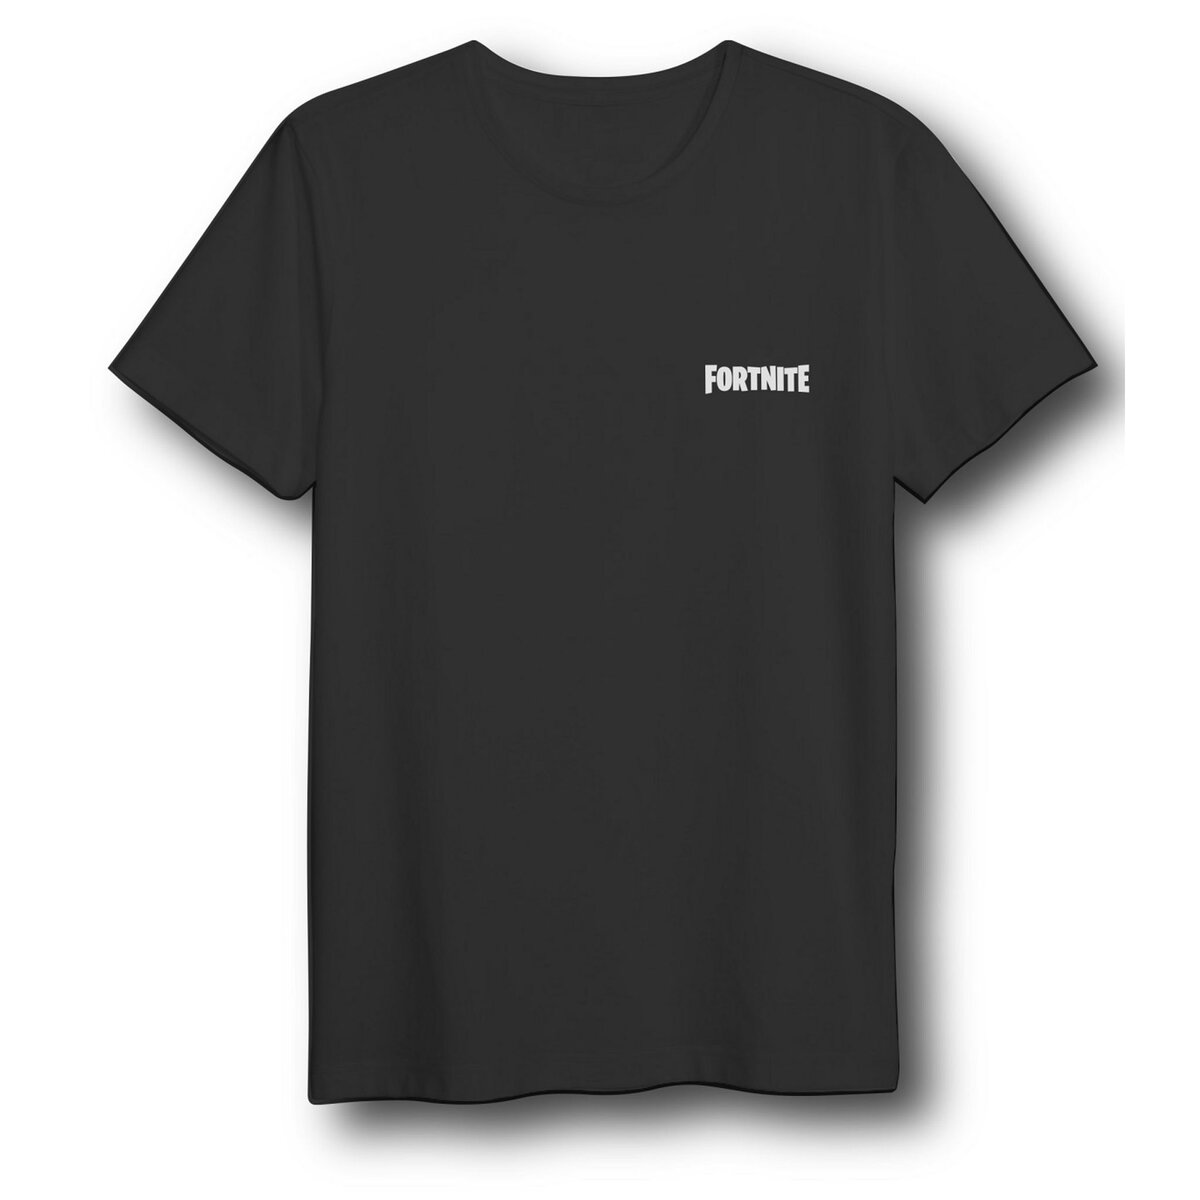 T-SHIRT FORTNITE Exclu Auchan Taille S